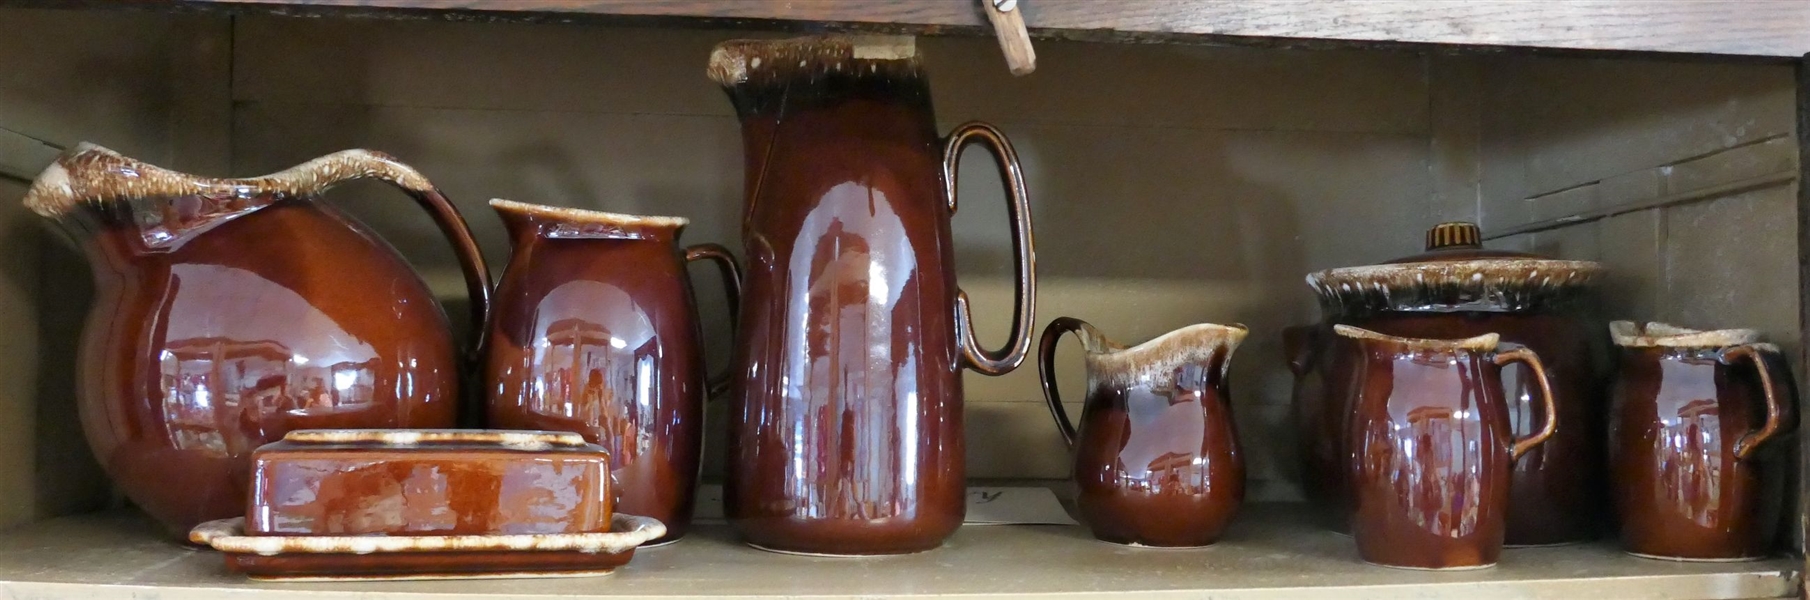 8 Pieces of Brown Hull Pottery including Pitchers, Bean Pot, Butter Dish, and Creamers - Largest Pitcher Measures 10" Tall 